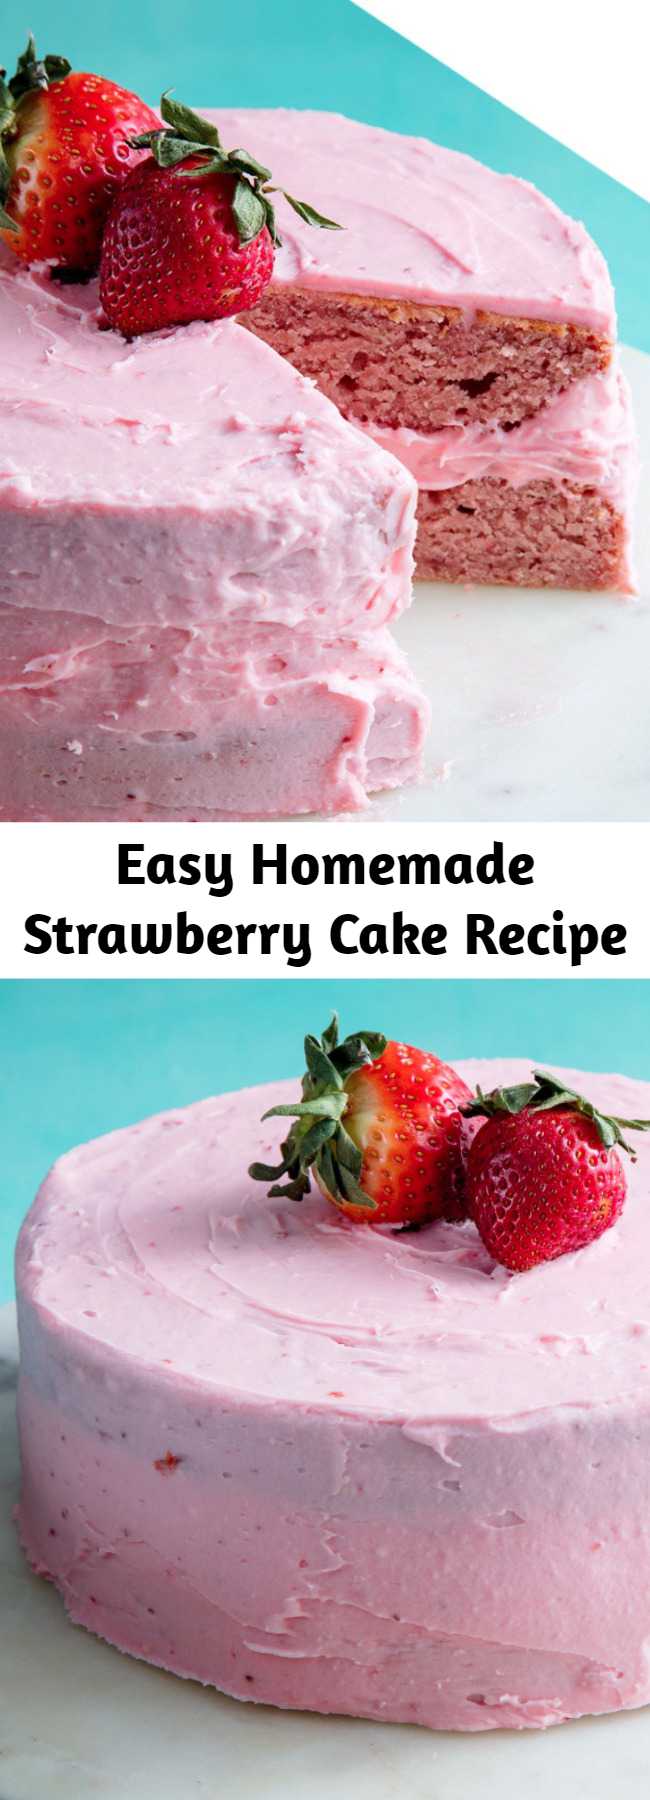 Easy Homemade Strawberry Cake Recipe - Strawberry cake is sweet and tart and unmatched to other cakes. The cream cheese frosting is what really makes this cake. Making strawberry compote is easier than you'd think. All you're doing is cooking down the fresh berries with sugar and lemon juice. We used it in the batter and frosting to make sure that the cake has the best strawberry flavor possible. The compote will make a little more than you need, but you can use leftover just as you would jam!